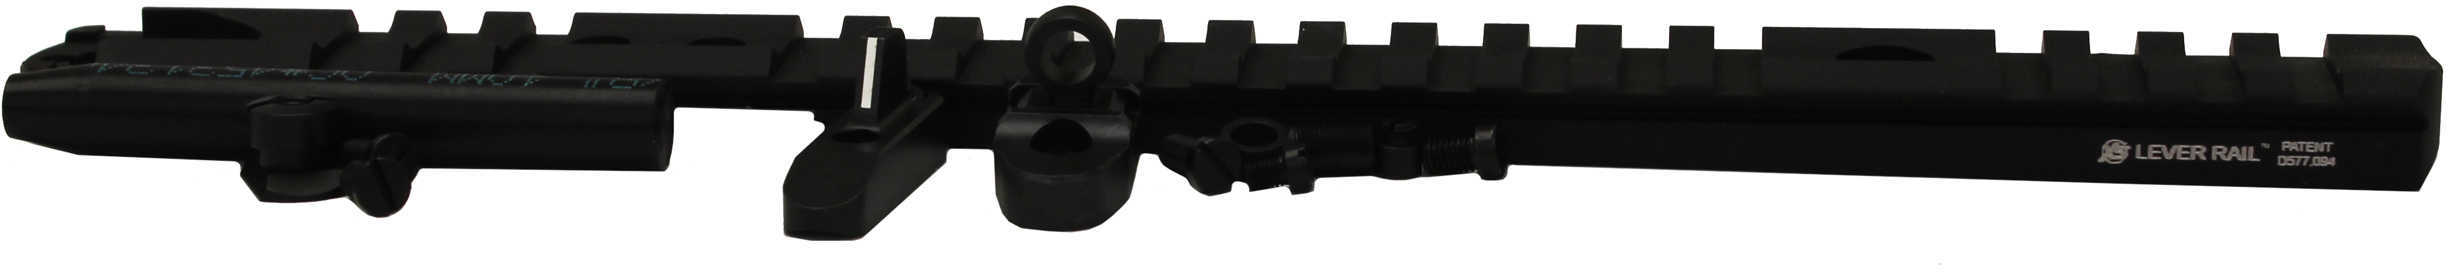 XS Sights Ml10045 Lever Rail Ghost Ring WS Marlin 1894 1-Piece Black Anodized